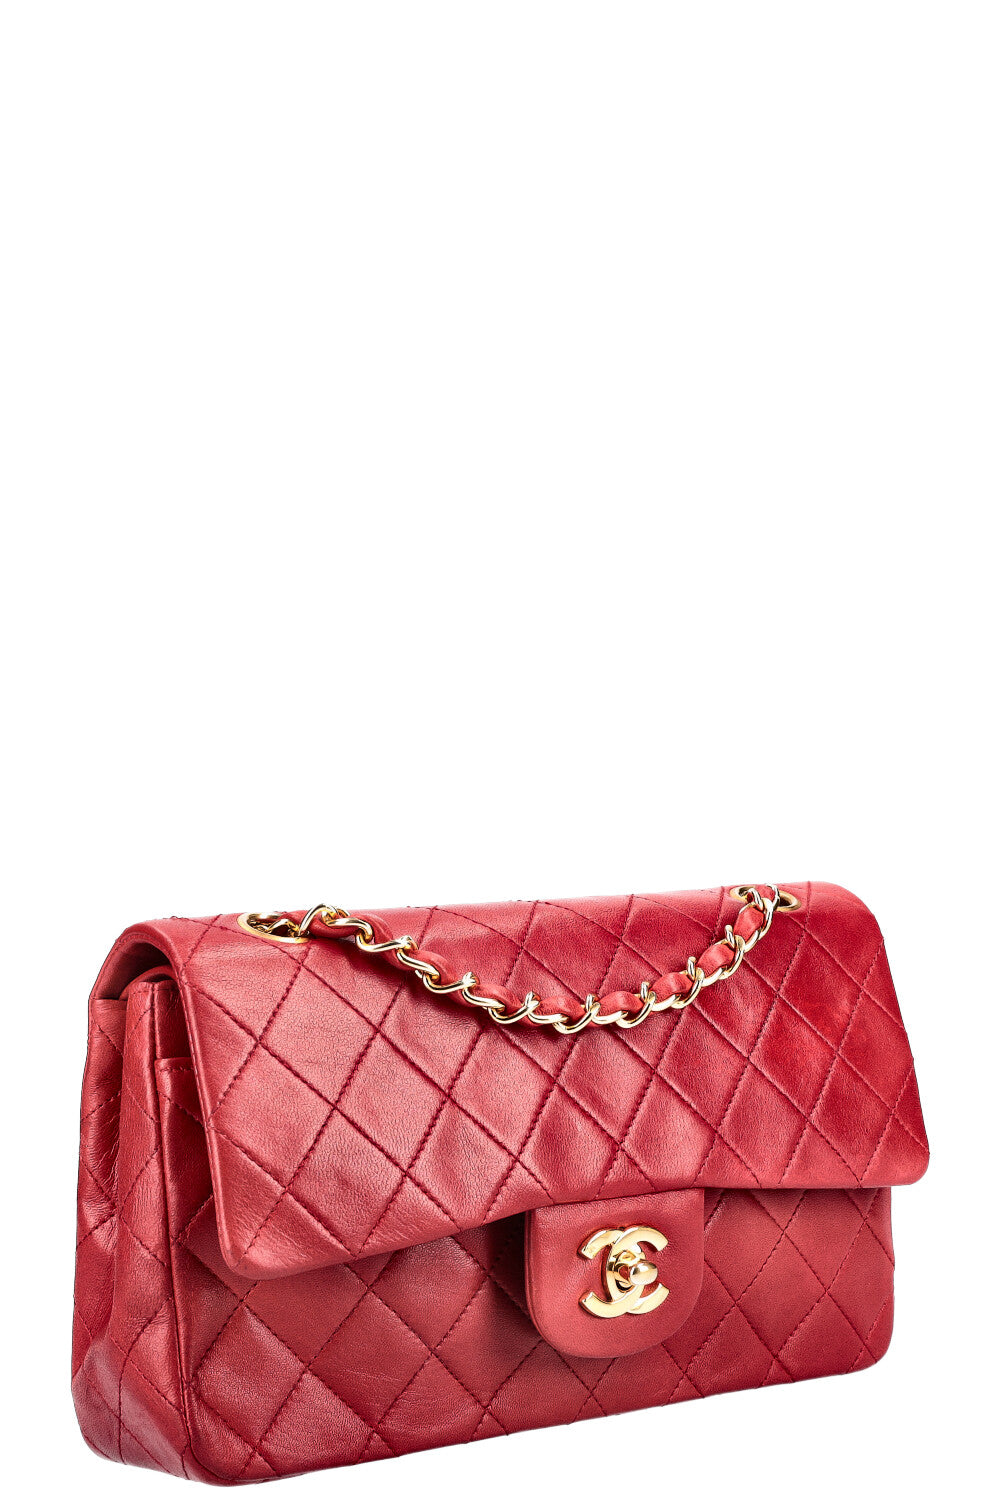 CHANEL Vintage Double Flap Bag Small Red